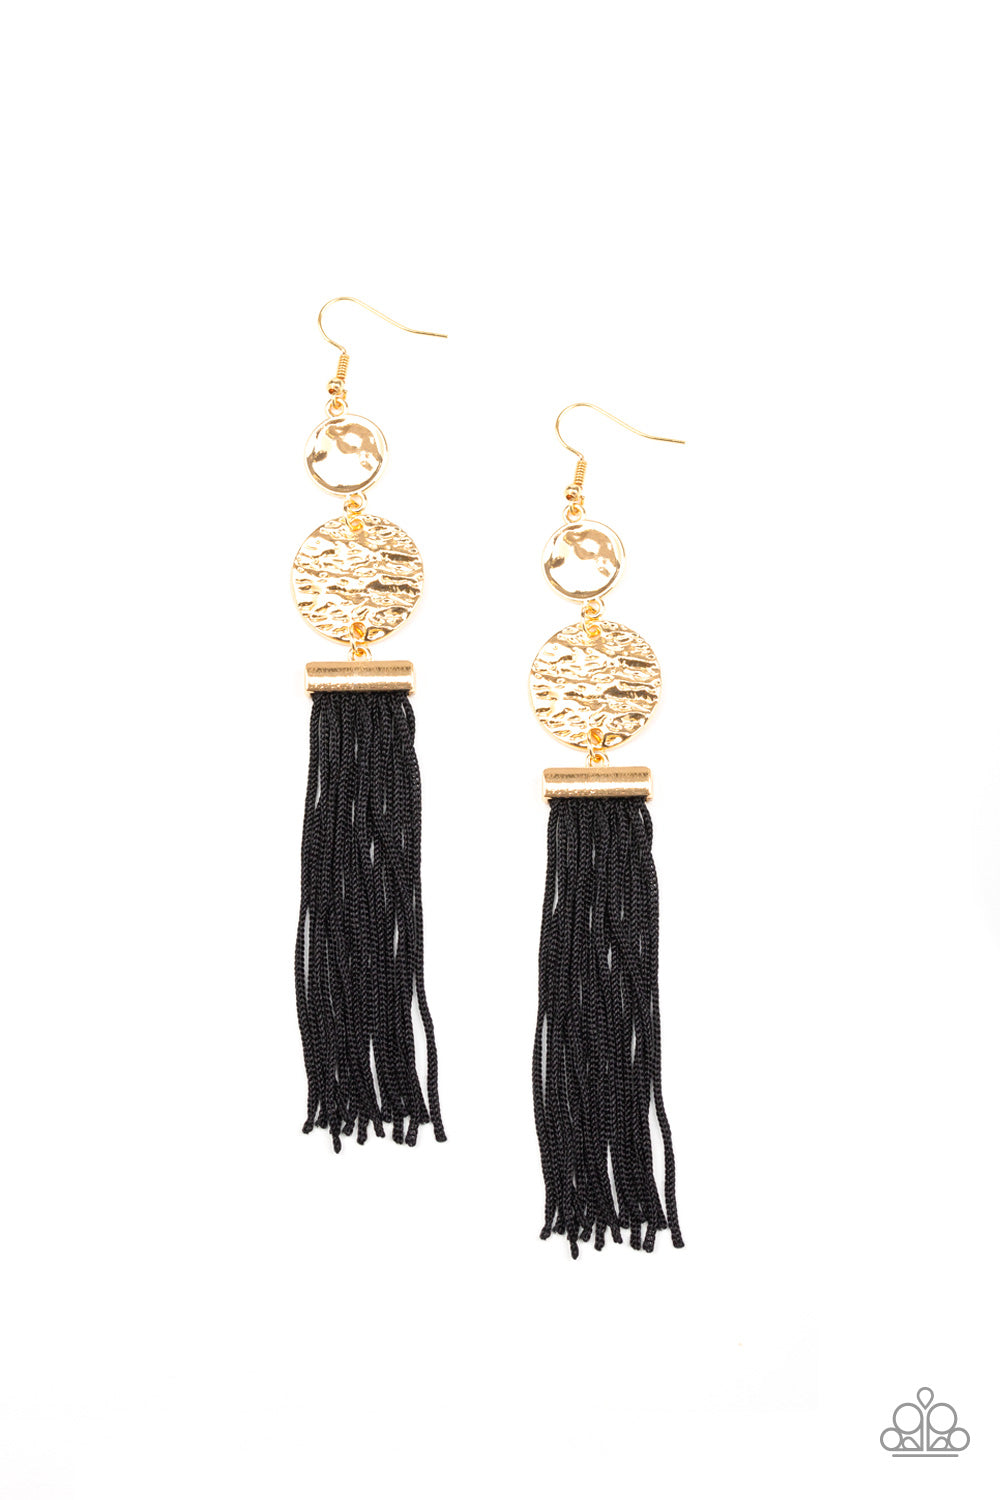 Paparazzi Lotus Gardens Gold Fishhook Earrings - Life Of The Party Exclusive October 2019